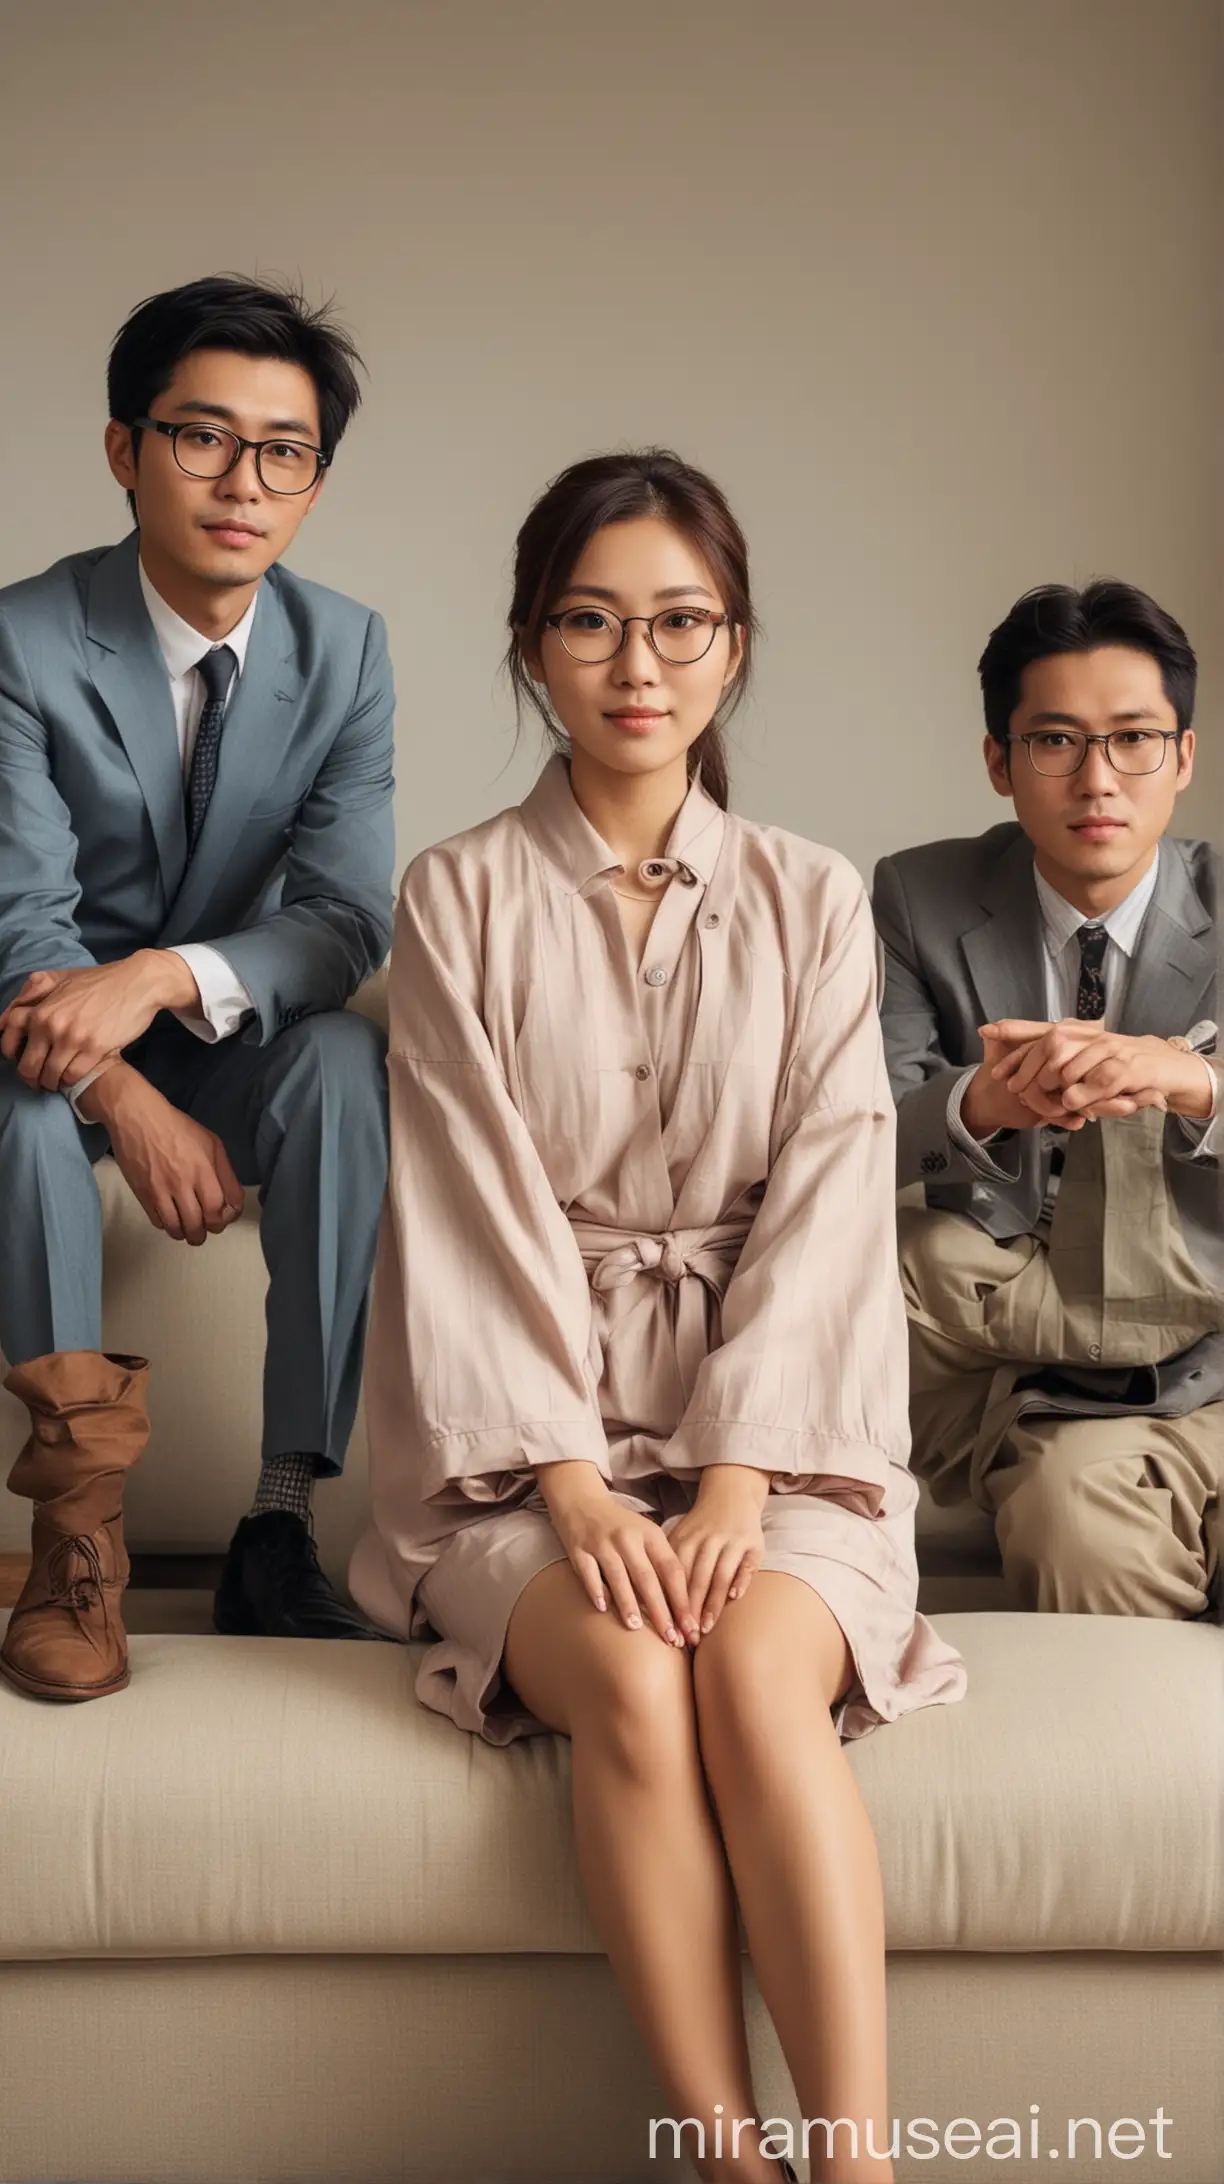 Japanese Woman with Glasses Sitting on Sofa Surrounded by Polite Men